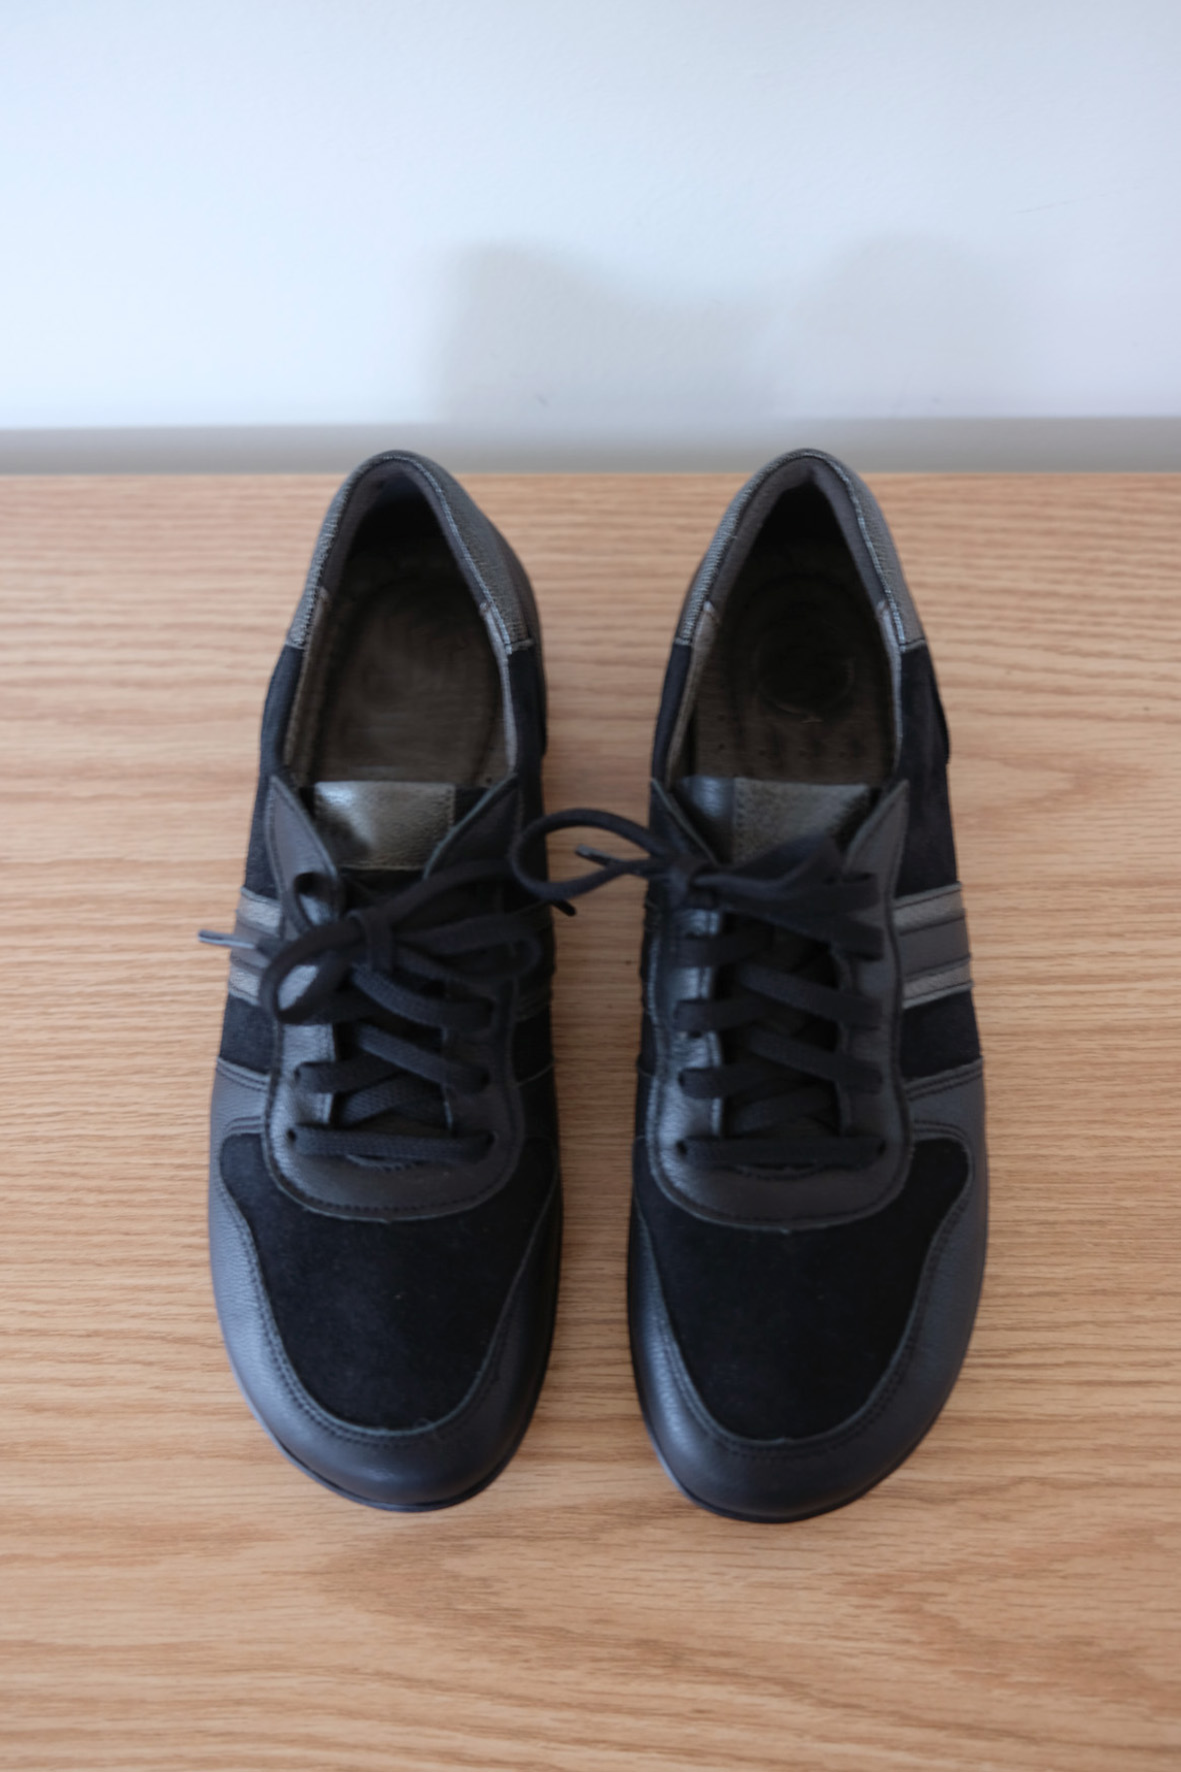 Black suade leather sneakers